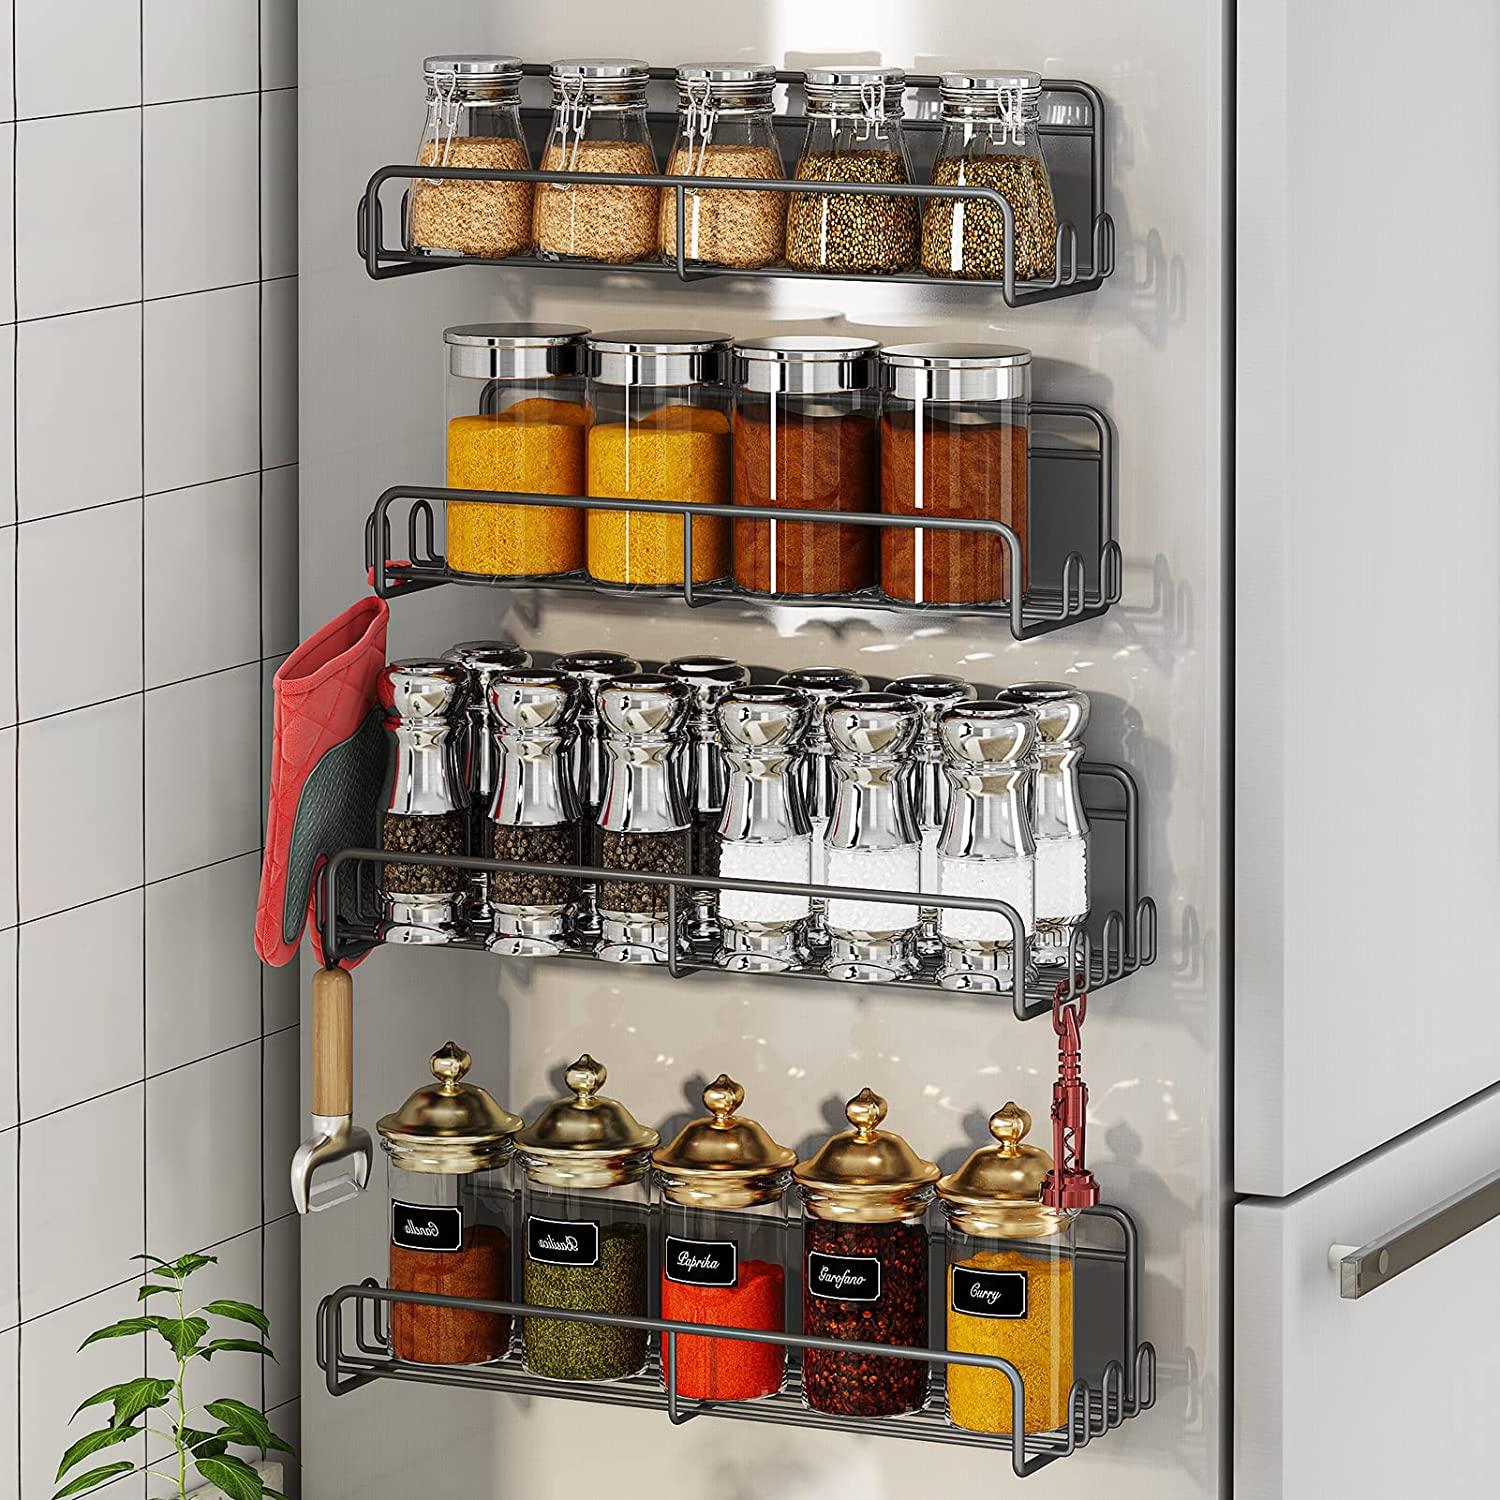 Coobest Magnetic Metal Spice Rack Organizer 4 Pack for $19.49 Shipped